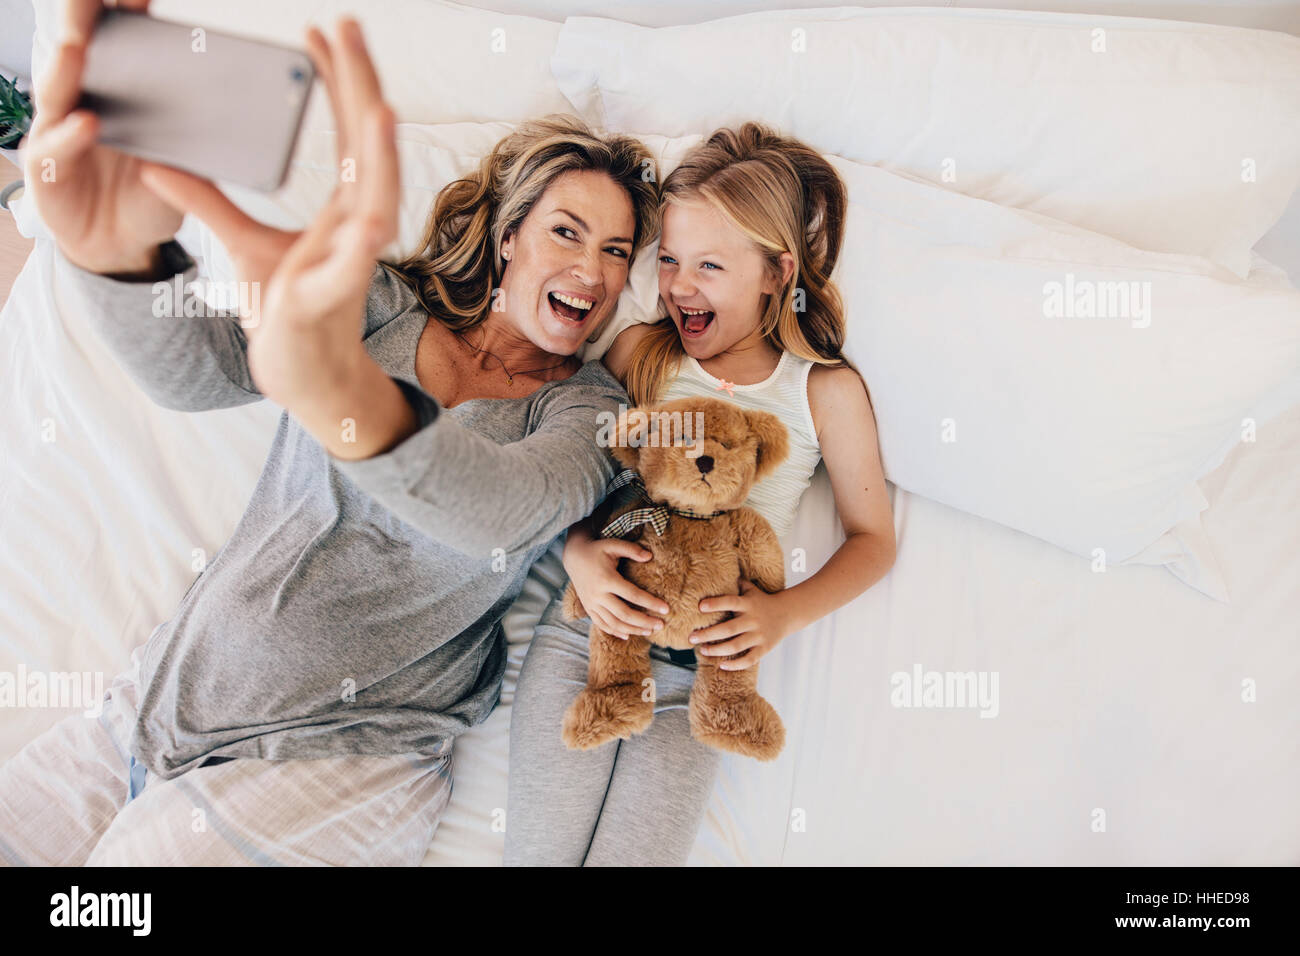 Happy young mother taking selfie with her daughter. Young family taking selfie on bed at home. Stock Photo